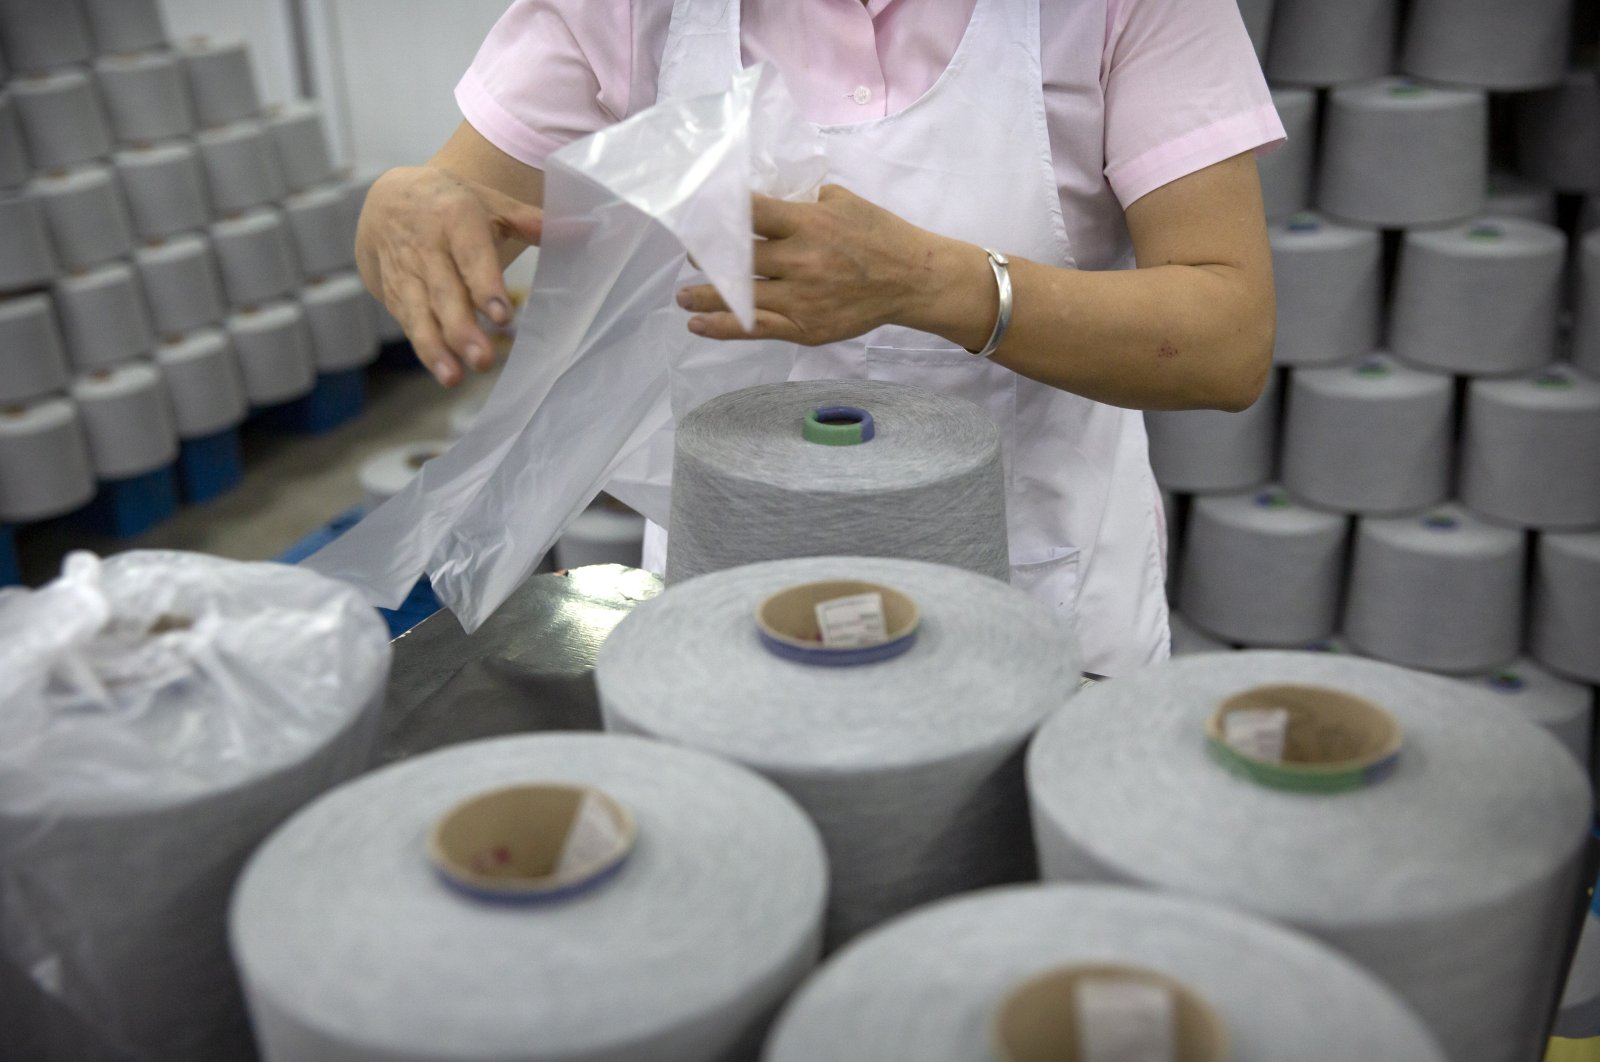 A worker packages spools of cotton yarn at a textile manufacturing plant, as seen during a government organized trip for foreign journalists, in Aksu in western China&#039;s Xinjiang Uyghur Autonomous Region, Tuesday, April 20, 2021. (AP Photo)